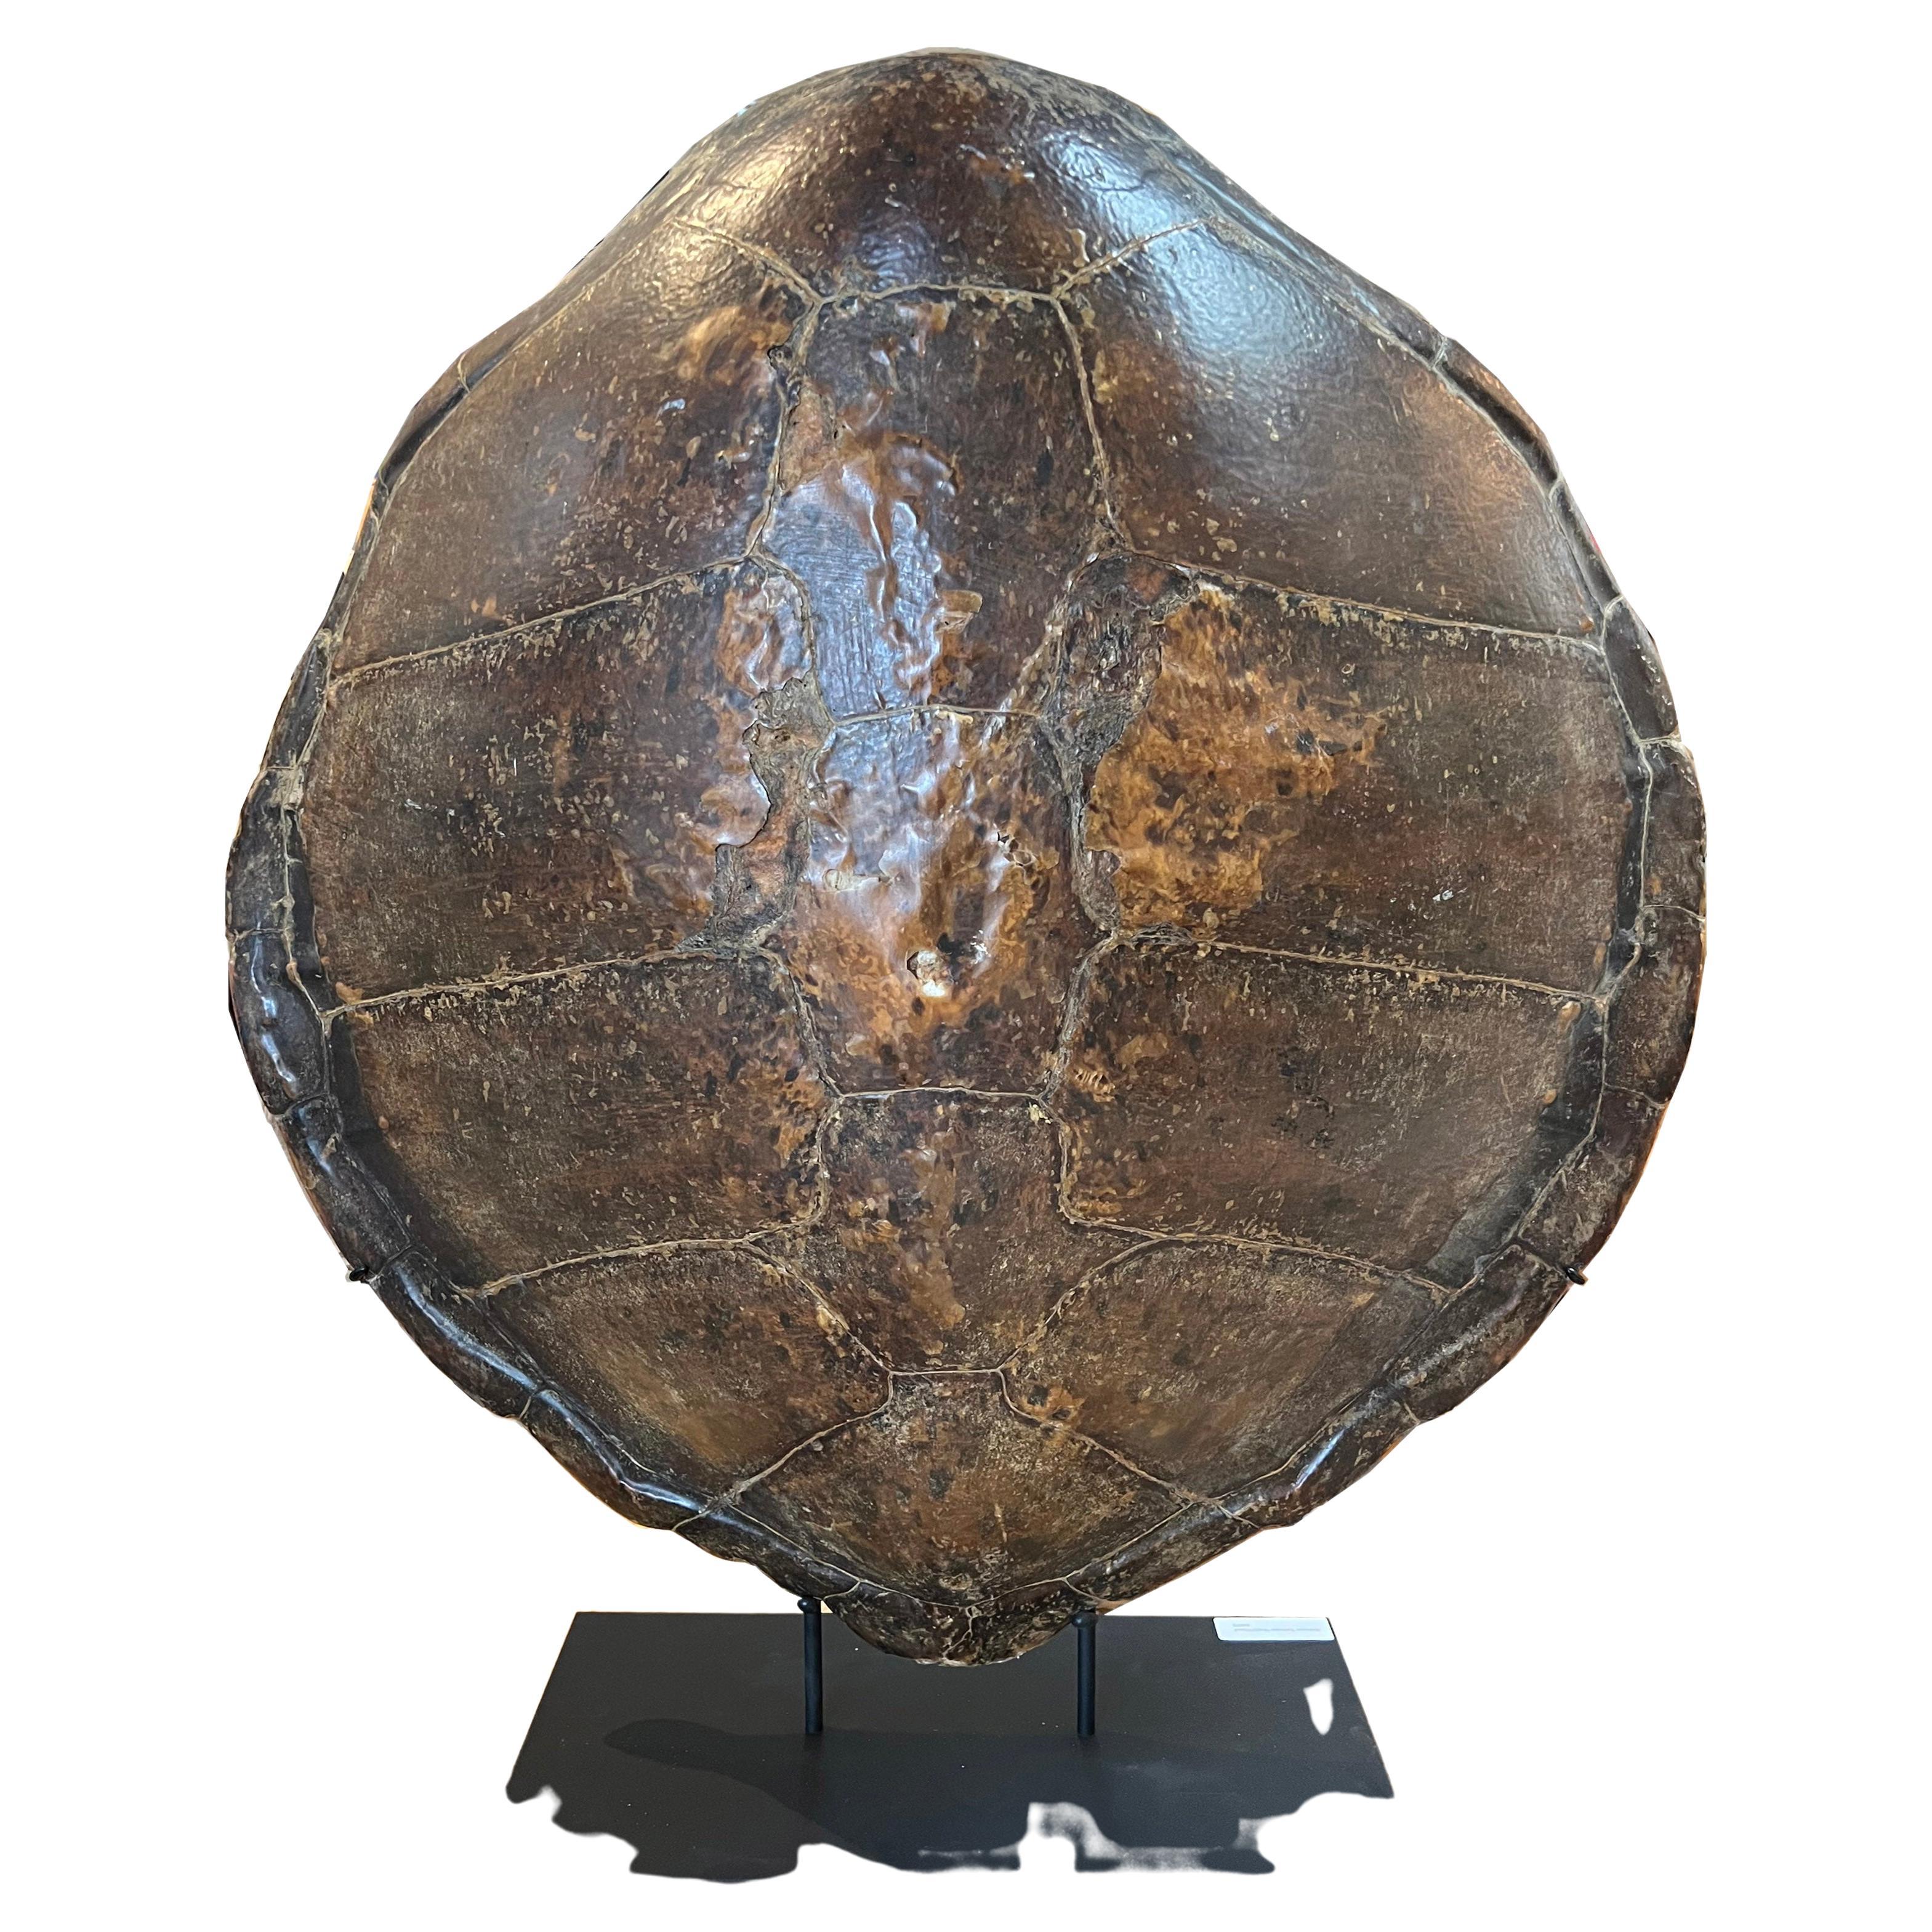 Very Unique Antique Green Turtle Shell. This Piece was acquired from a private collection where it had been for decades, now available for purchase it is a wonderful and very large sea turtle shell. This is mounded on a custom steel base and very